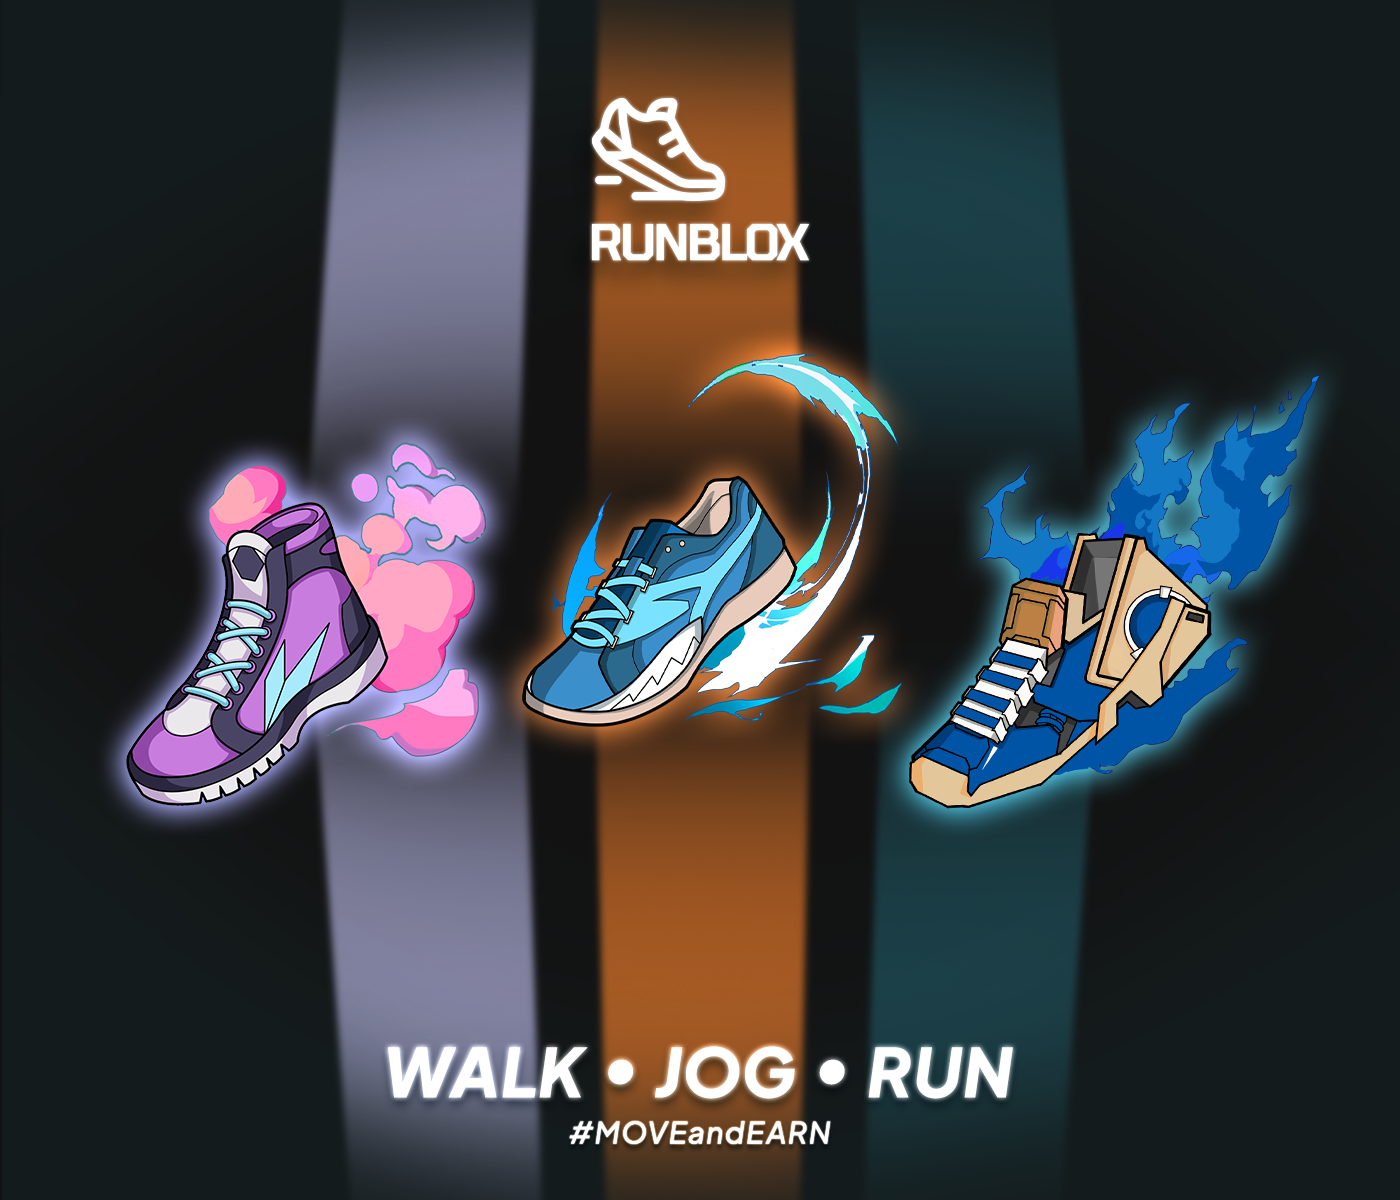 game image from RunBlox